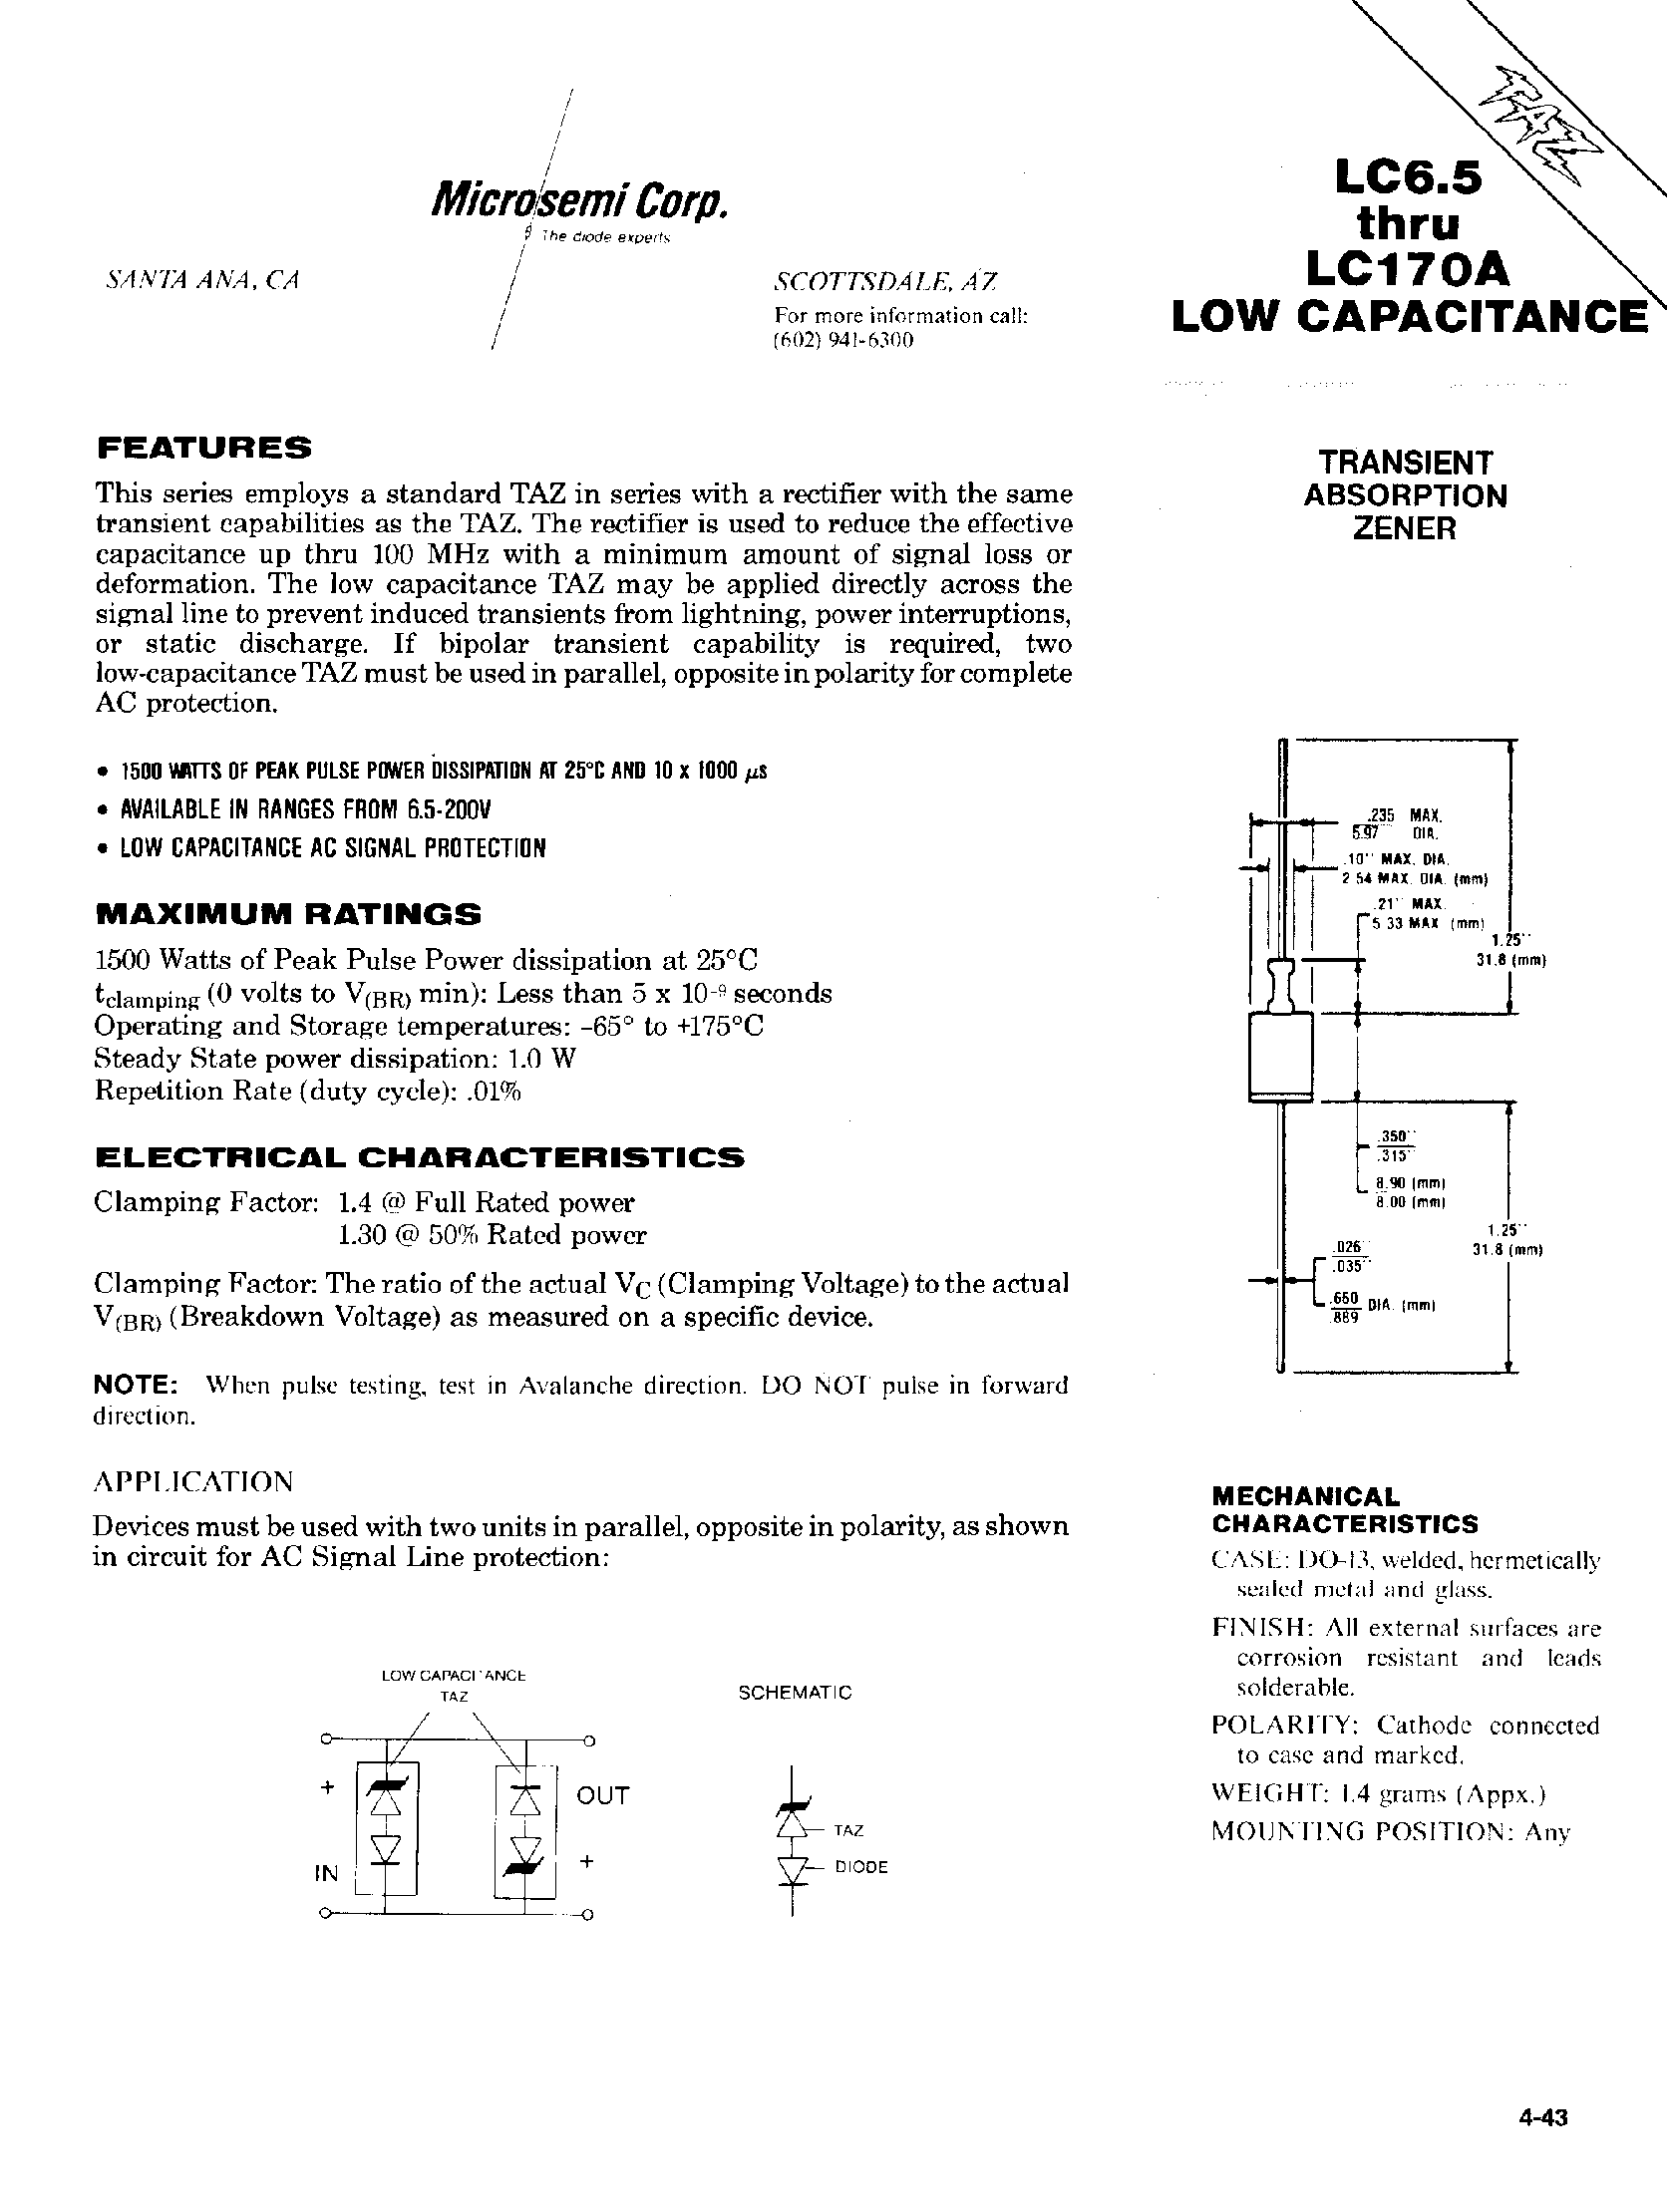 Даташит LC15A - TRANSIENT ABSORPTION ZENER страница 1